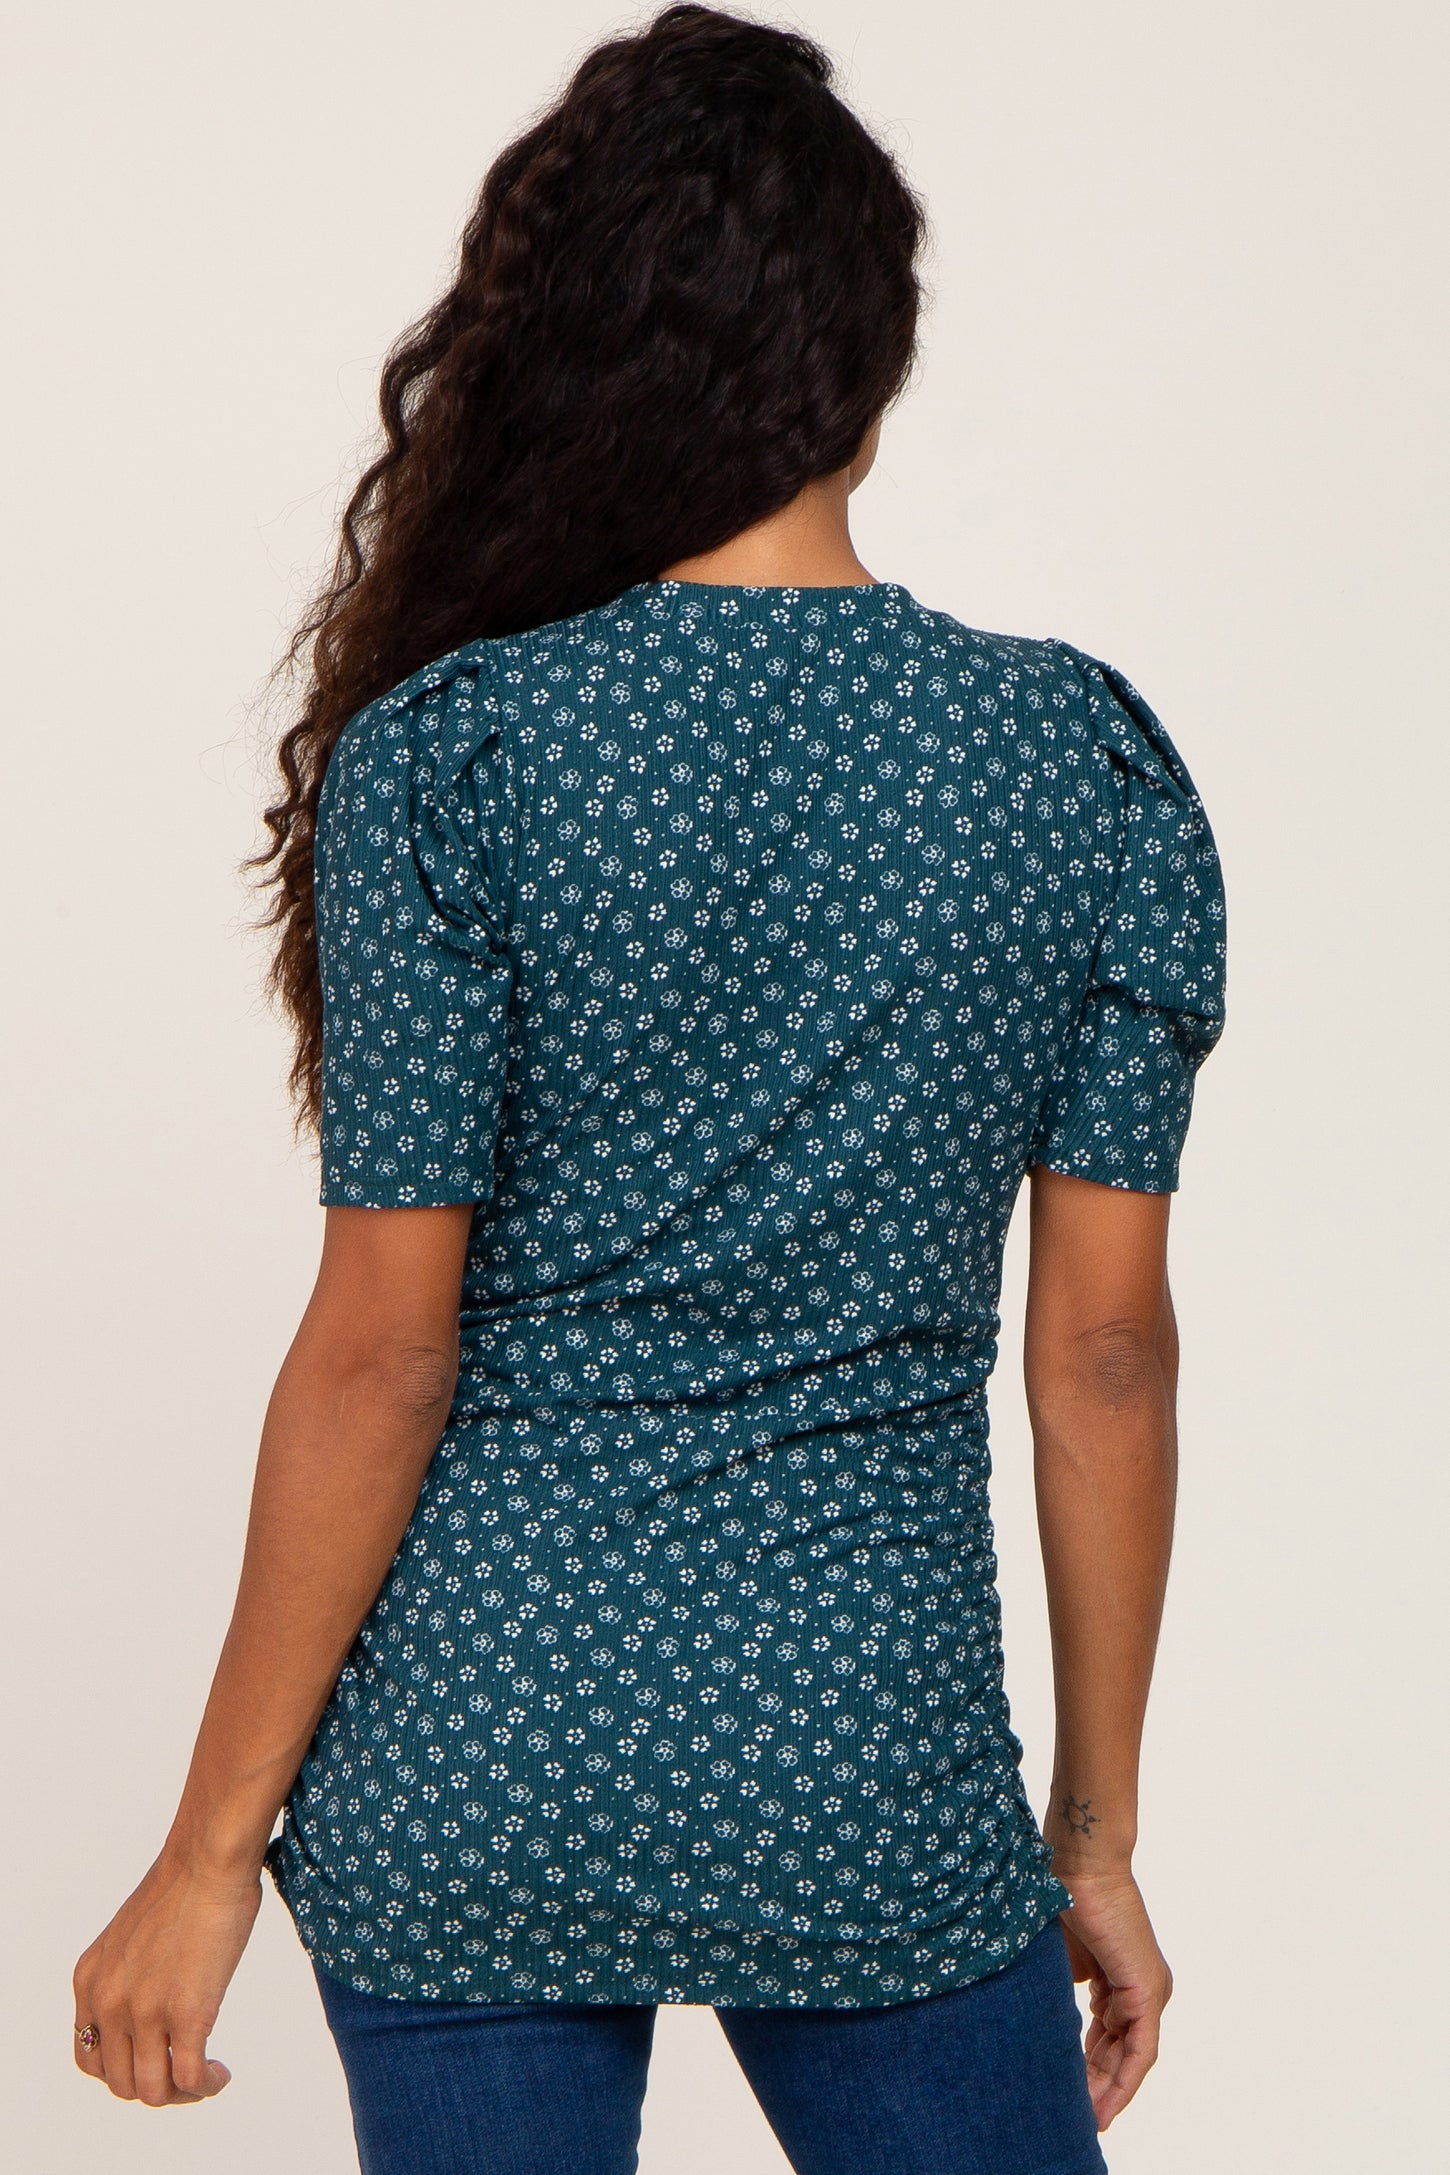 Dark Teal Floral Ribbed Fitted Top